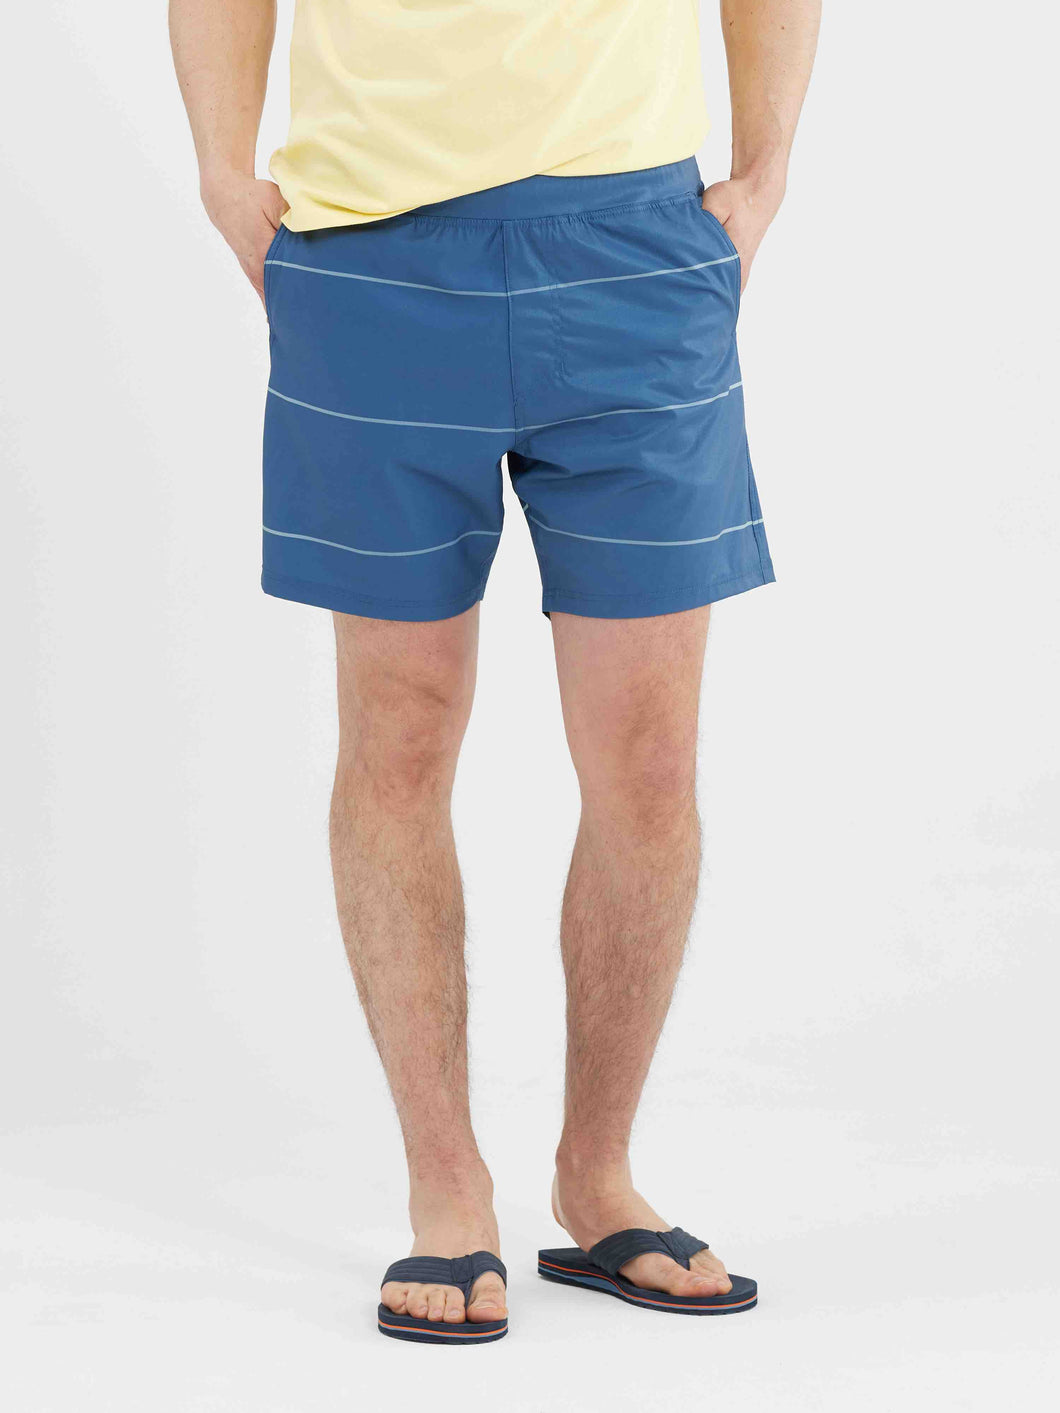 AXEL BOARDSHORT BATHING SUIT - INSEAM 6.5 - The Mens Shoppe & Her Boutique